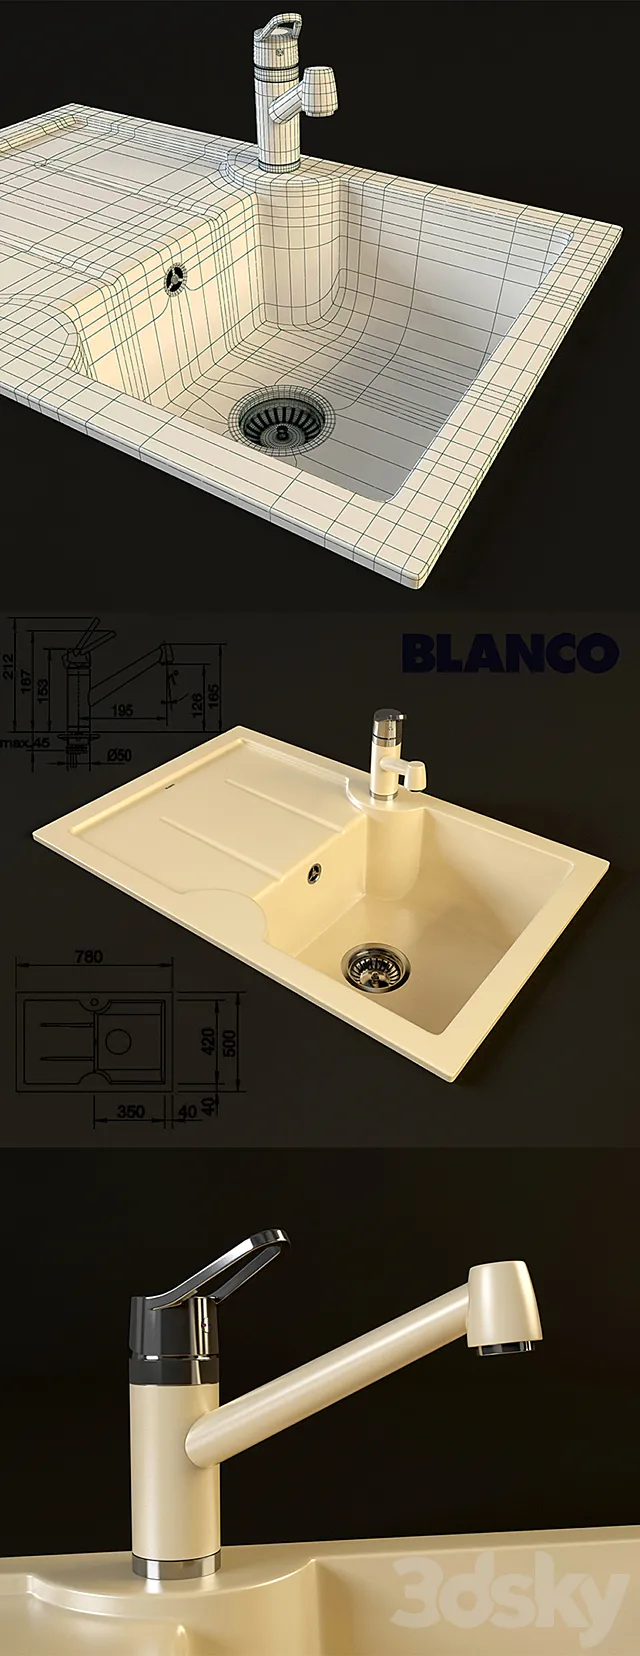 Blanco sink and faucet Blanco 45s Idessa Actis 3DSMax File